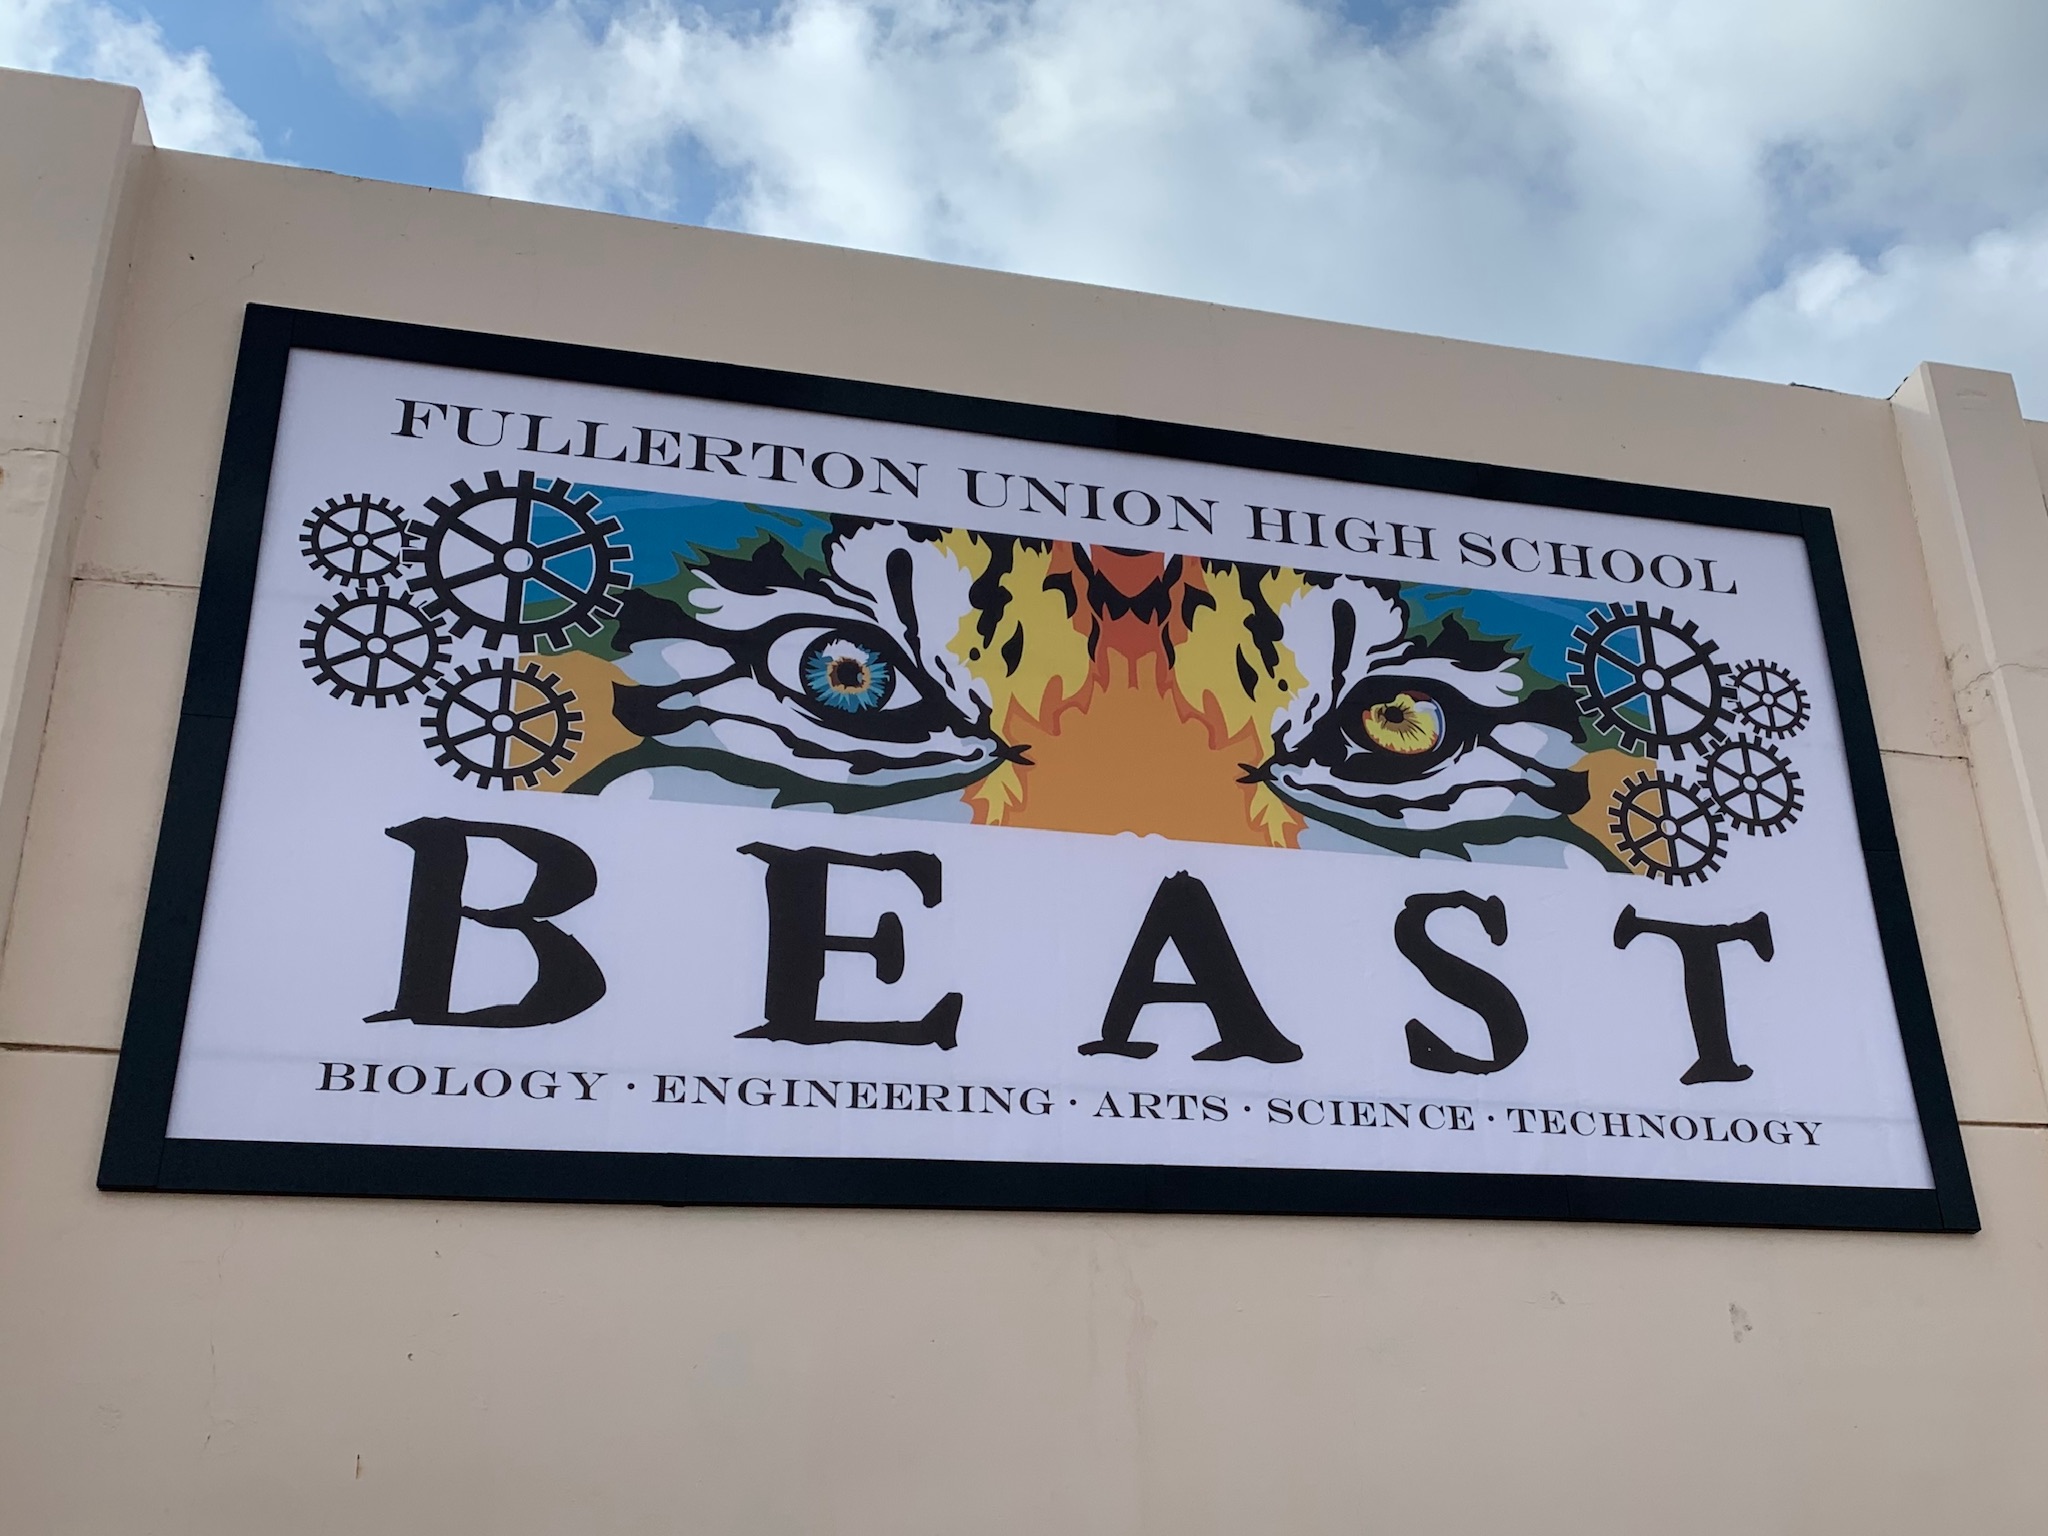 Fullerton-Union-High-School-BEAST-Biology-Engineering-Arts-Science-Technology-Banner-Frame-Classic-on-stucco-8oz-mesh-16x32-1 Do you have a BEAST to feed?